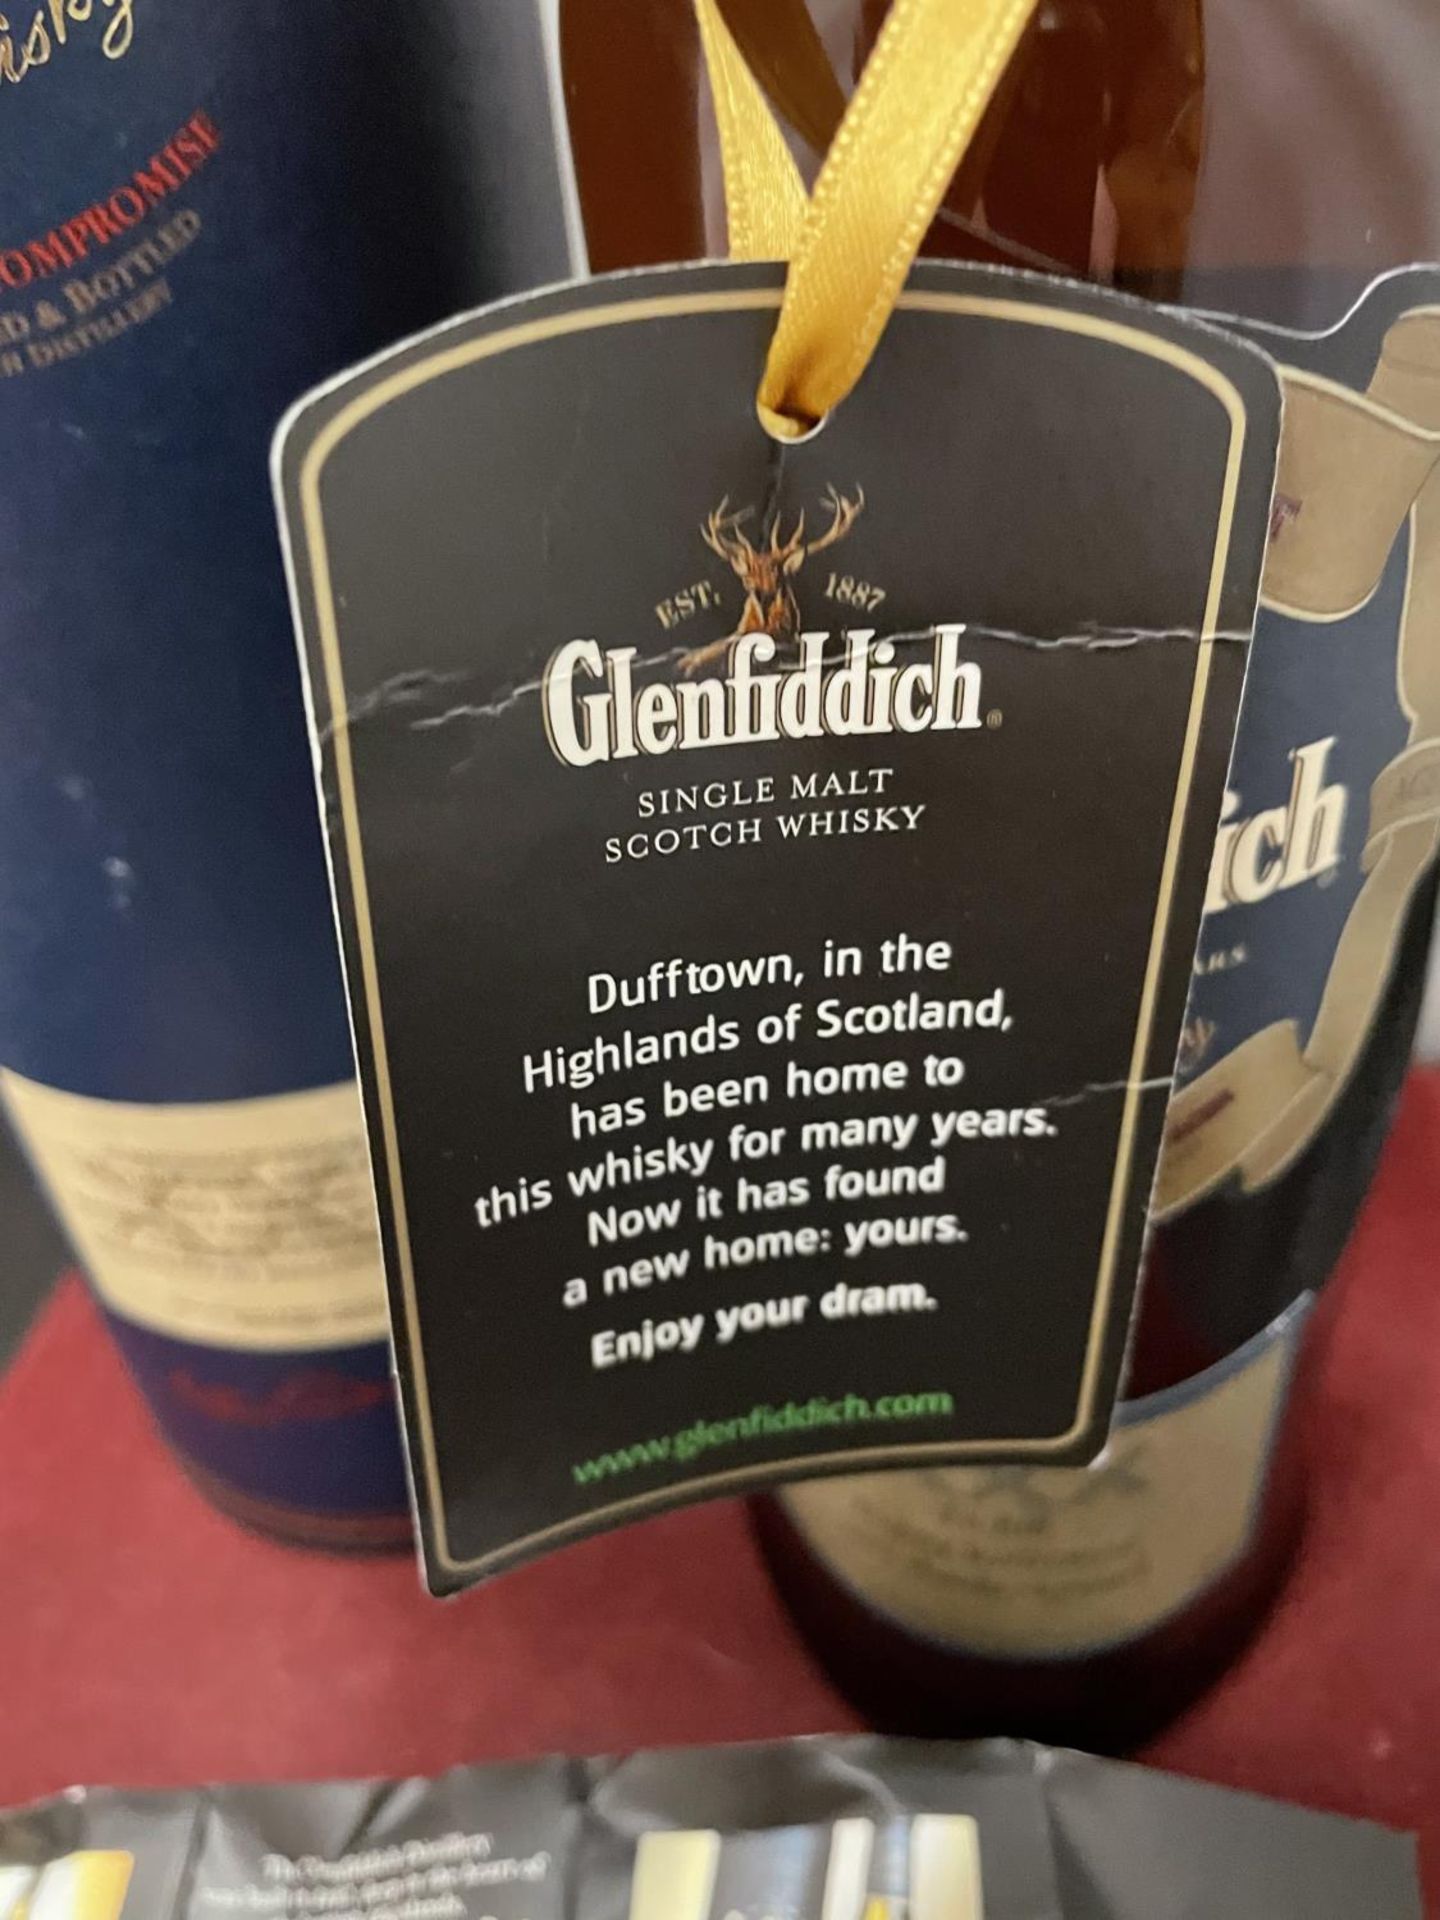 A 70 CL BOTTLE OF GLENFIDDICH AGED 30 YEARS SINGLE MALT - Image 3 of 4